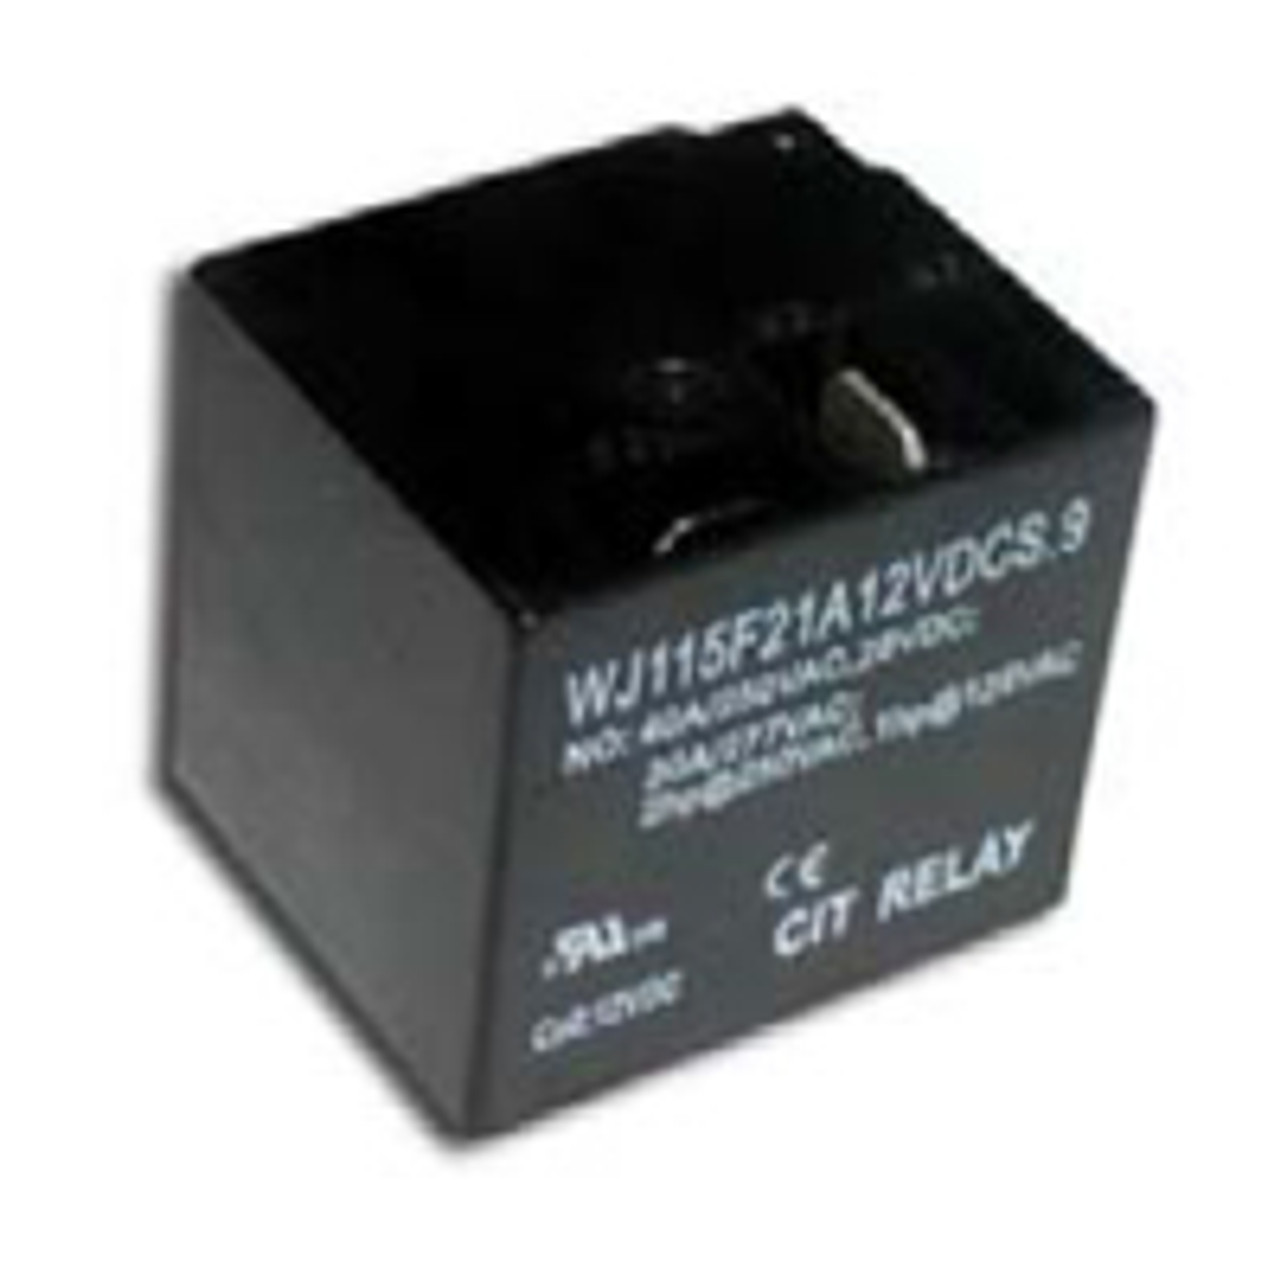 CIT Relay and Switch J115F21A24VDCN.9 Power Relays